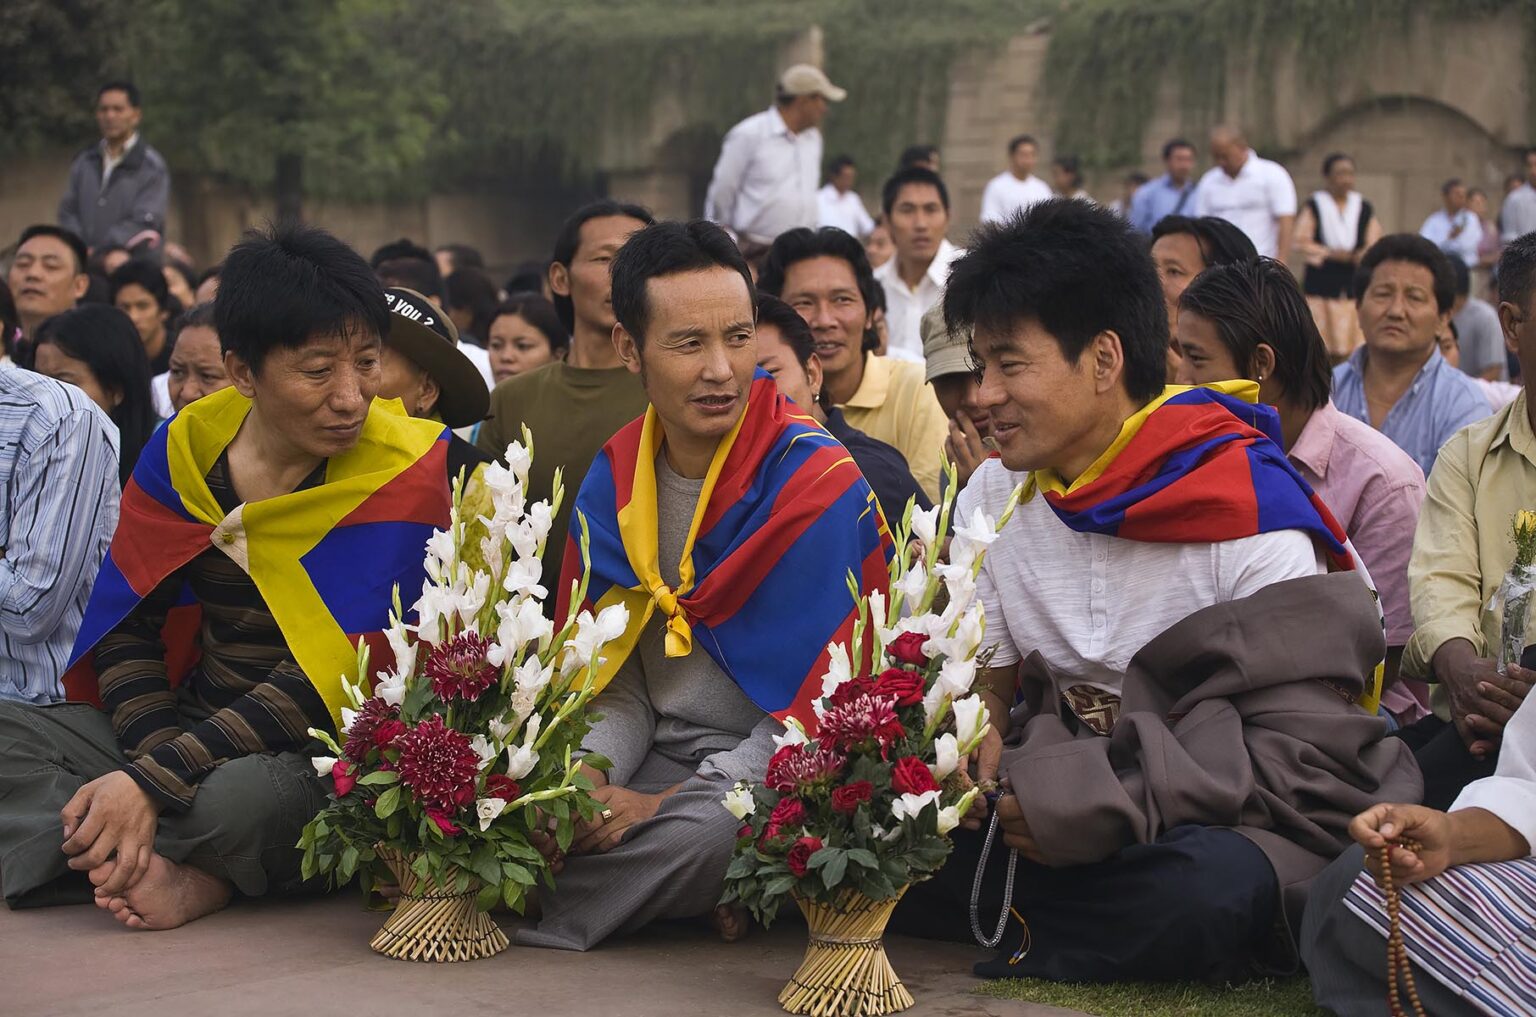 Tibetan Buddhists attend a PRAYER FOR WORLD PEACE sponsored by the14th Dalai Lama of Tibet at the RAJ GHAT (Ghandi's eternal flame) in April of 2008 -  NEW DELHI, INDIA